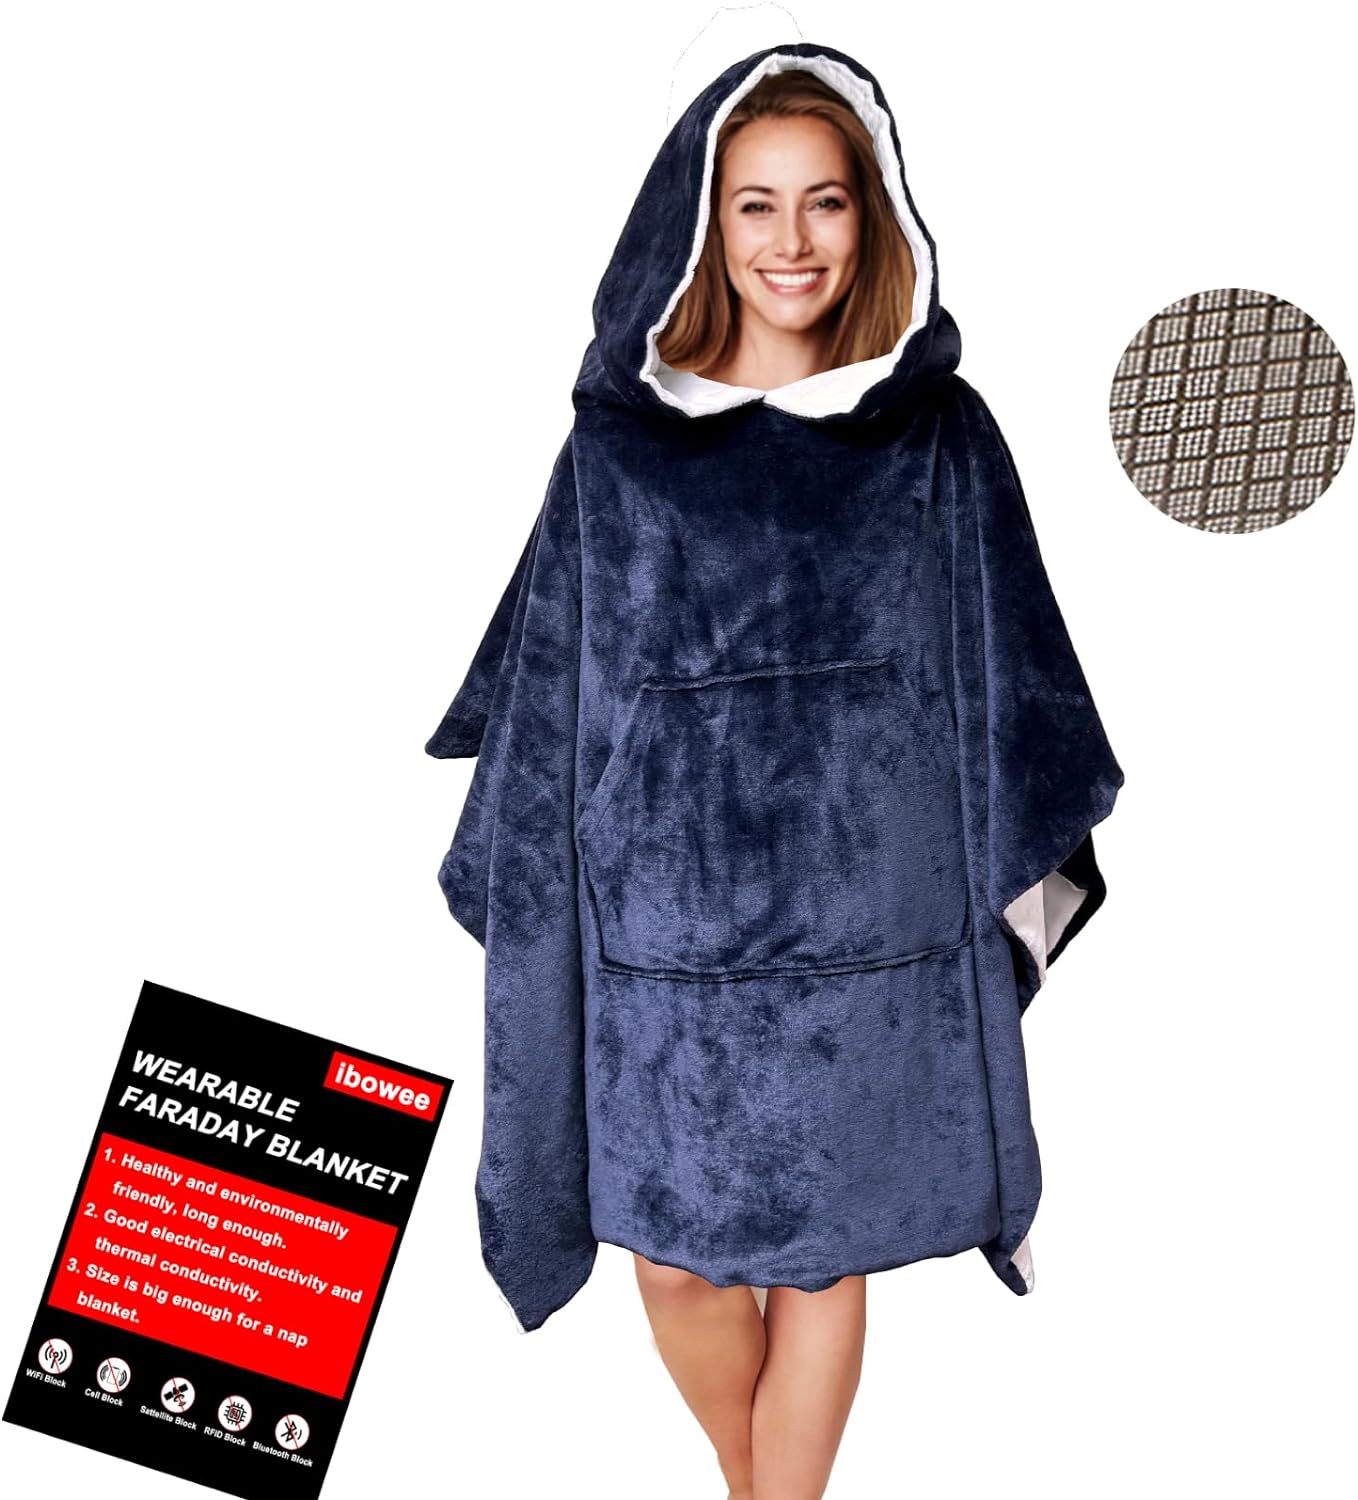 Ibowee Wearable Faraday Blanket with Faraday Copper Nickle Fabric